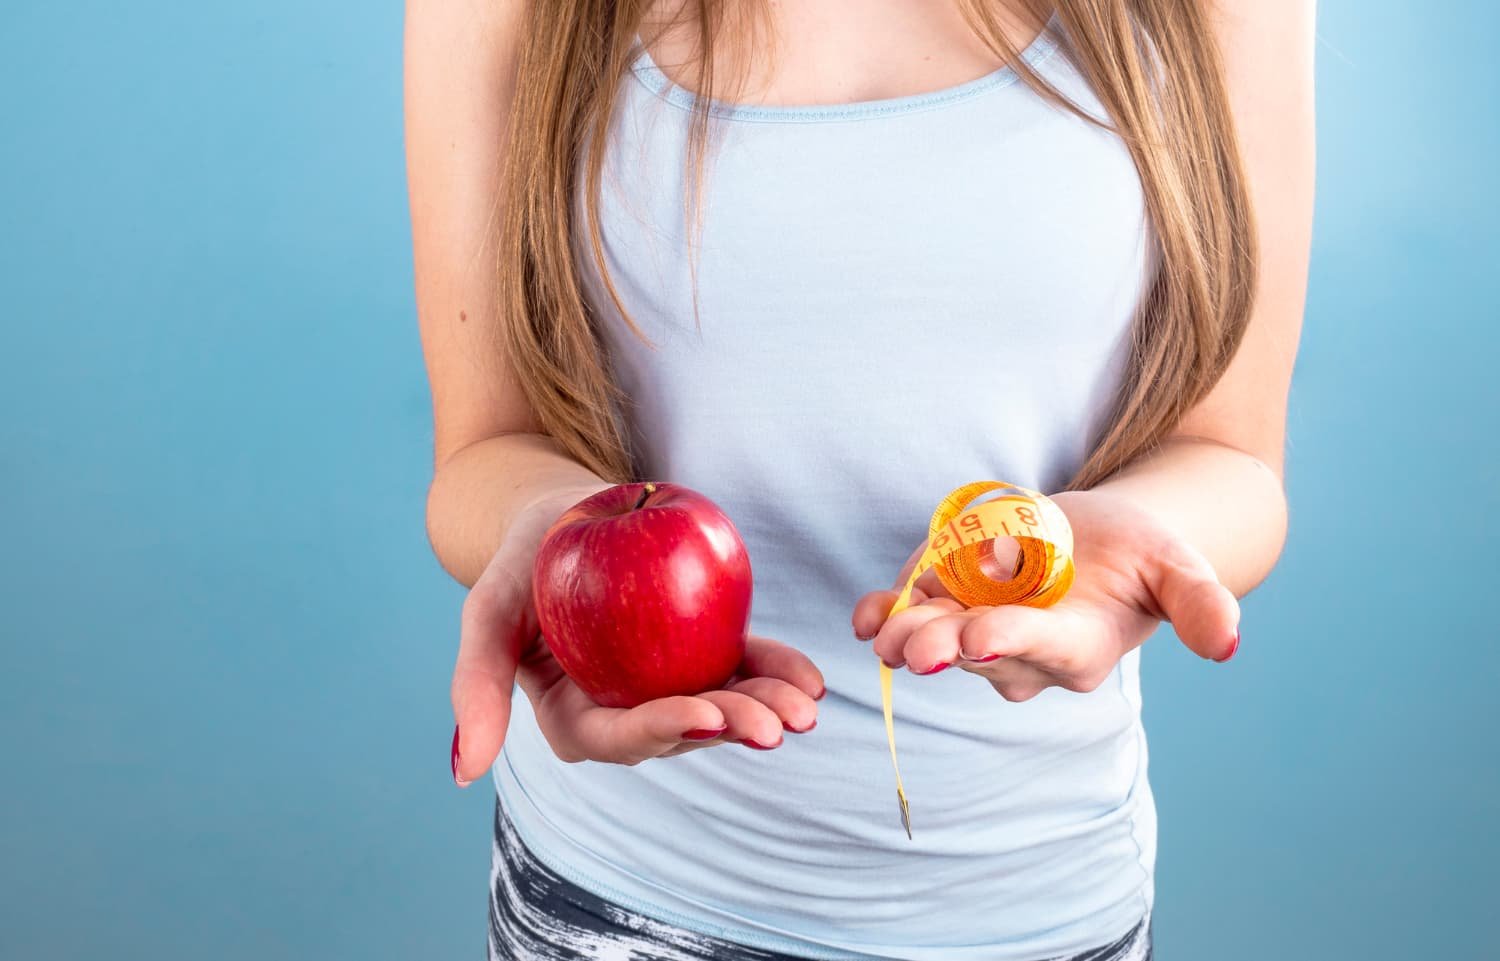 Does Apple Cider Vinegar Help in Weight Loss?